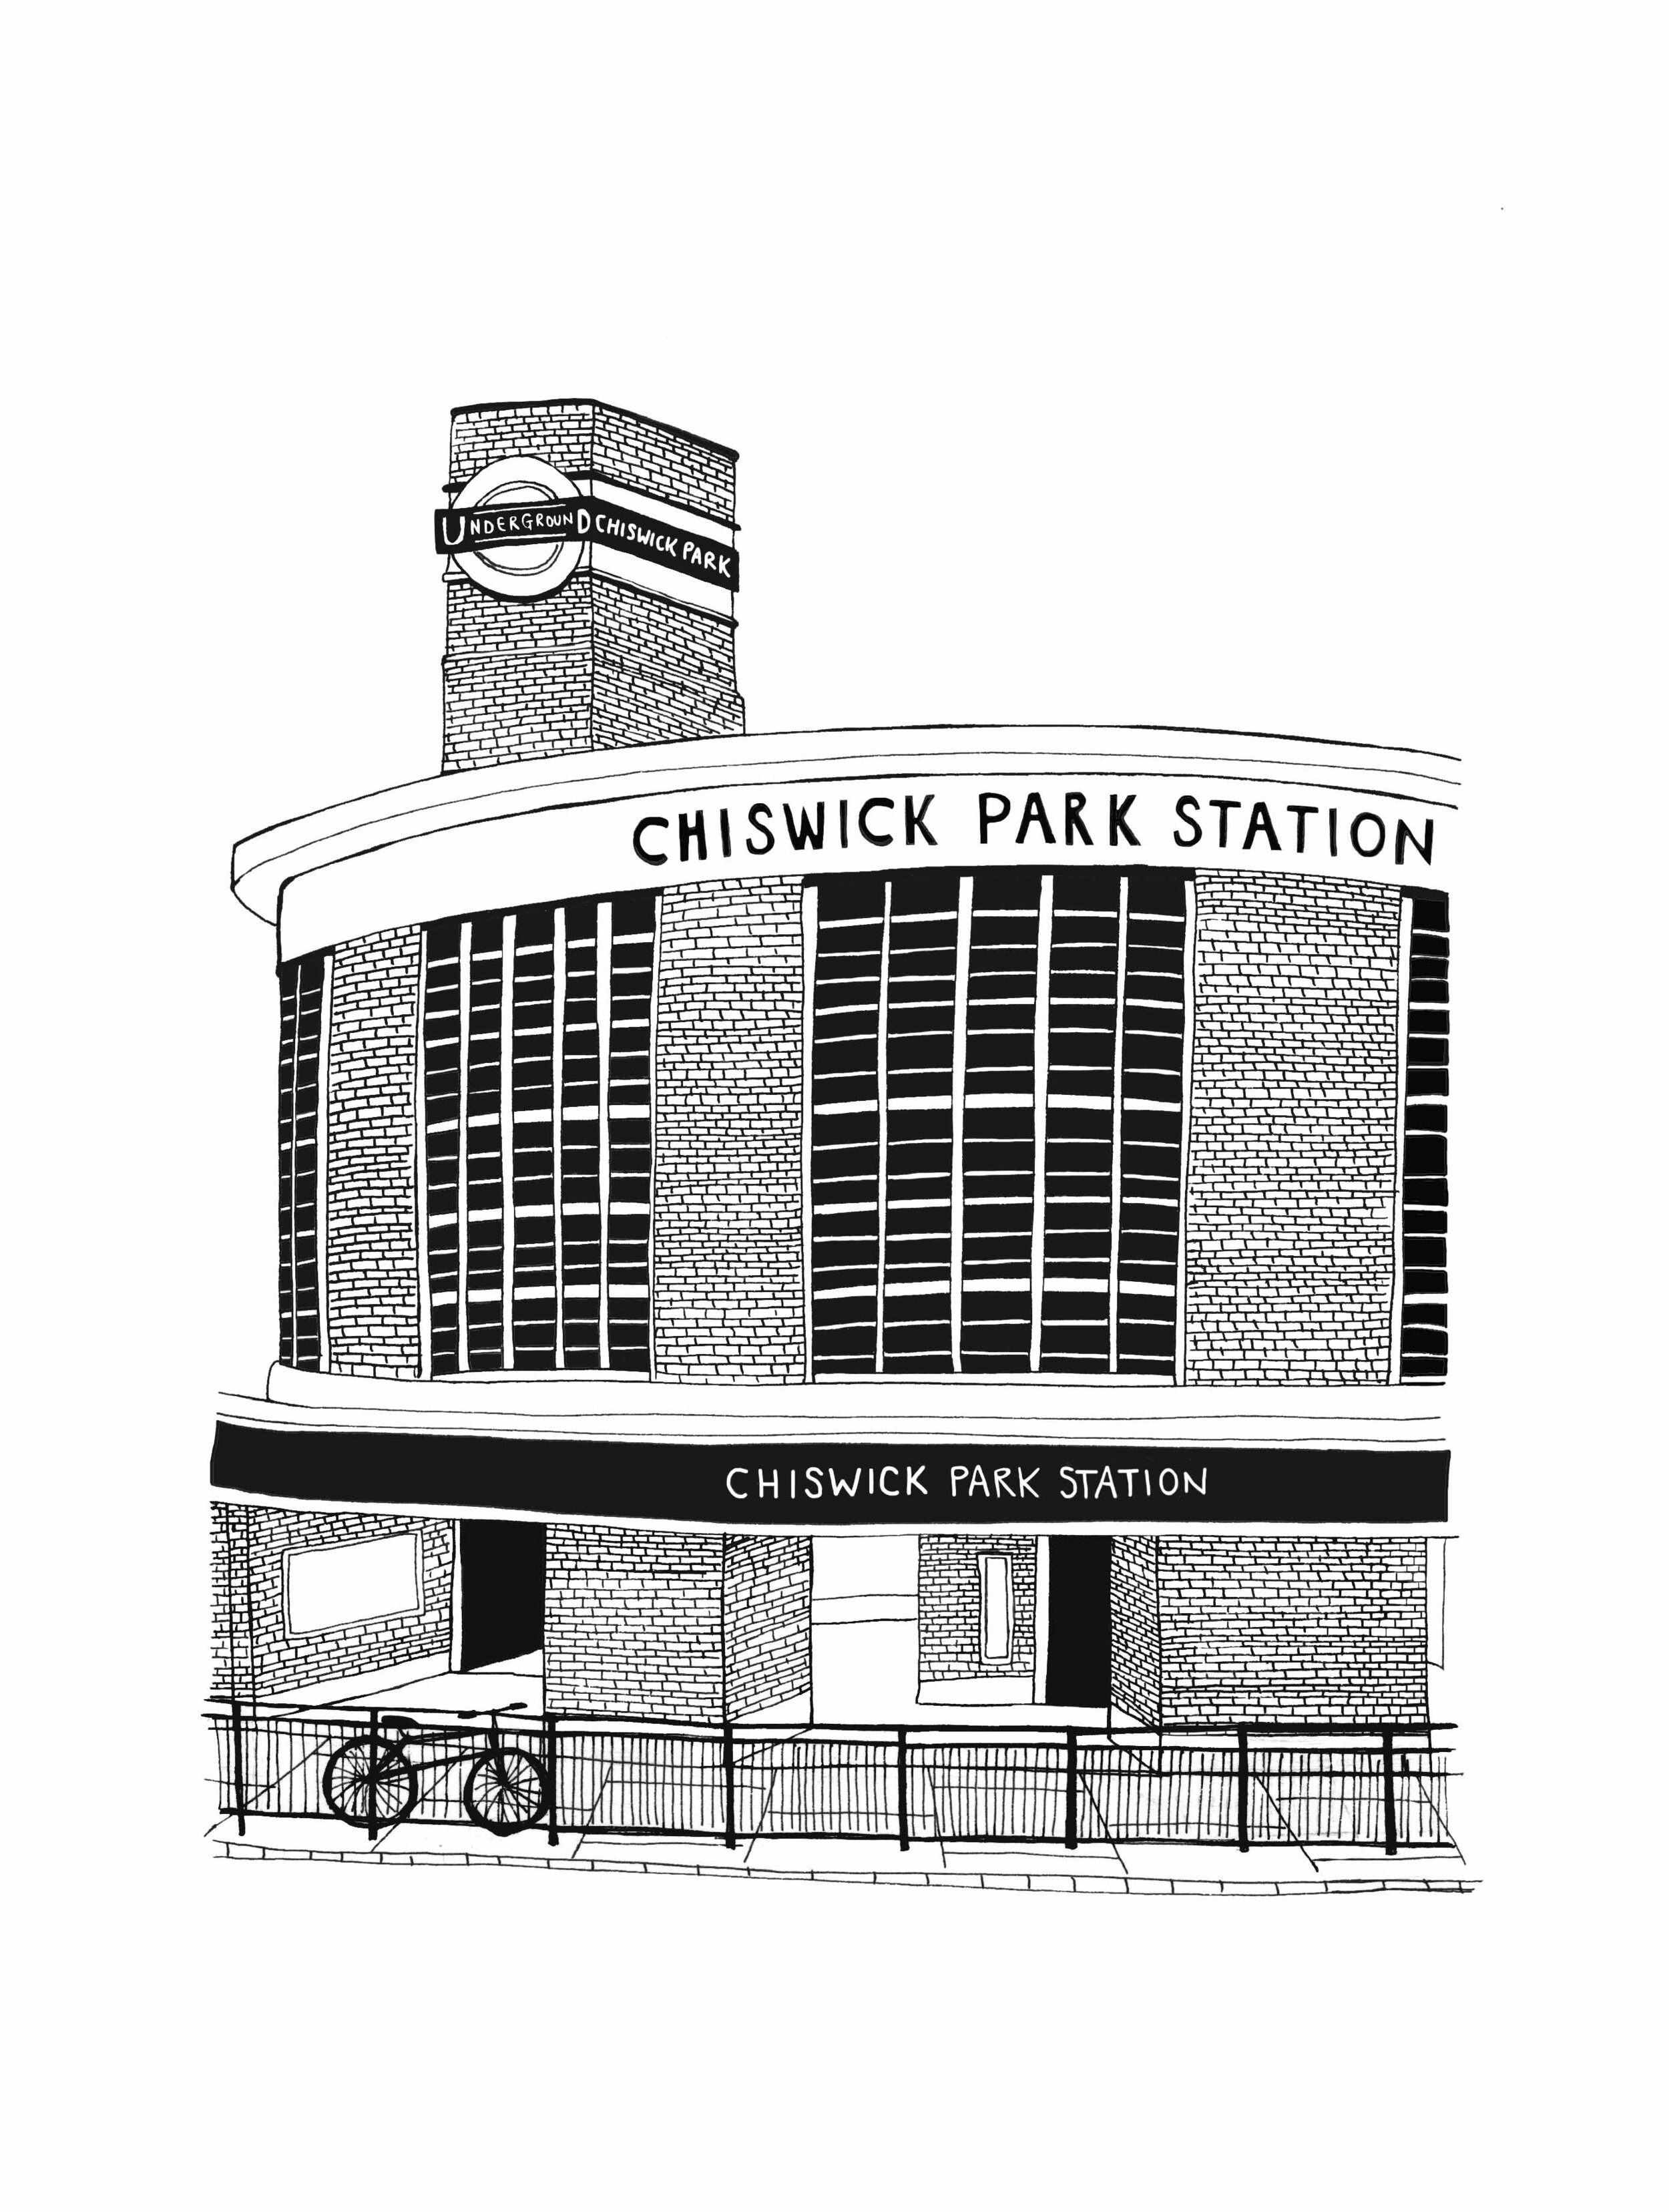 Chiswick Park Underground Station, Private Commission